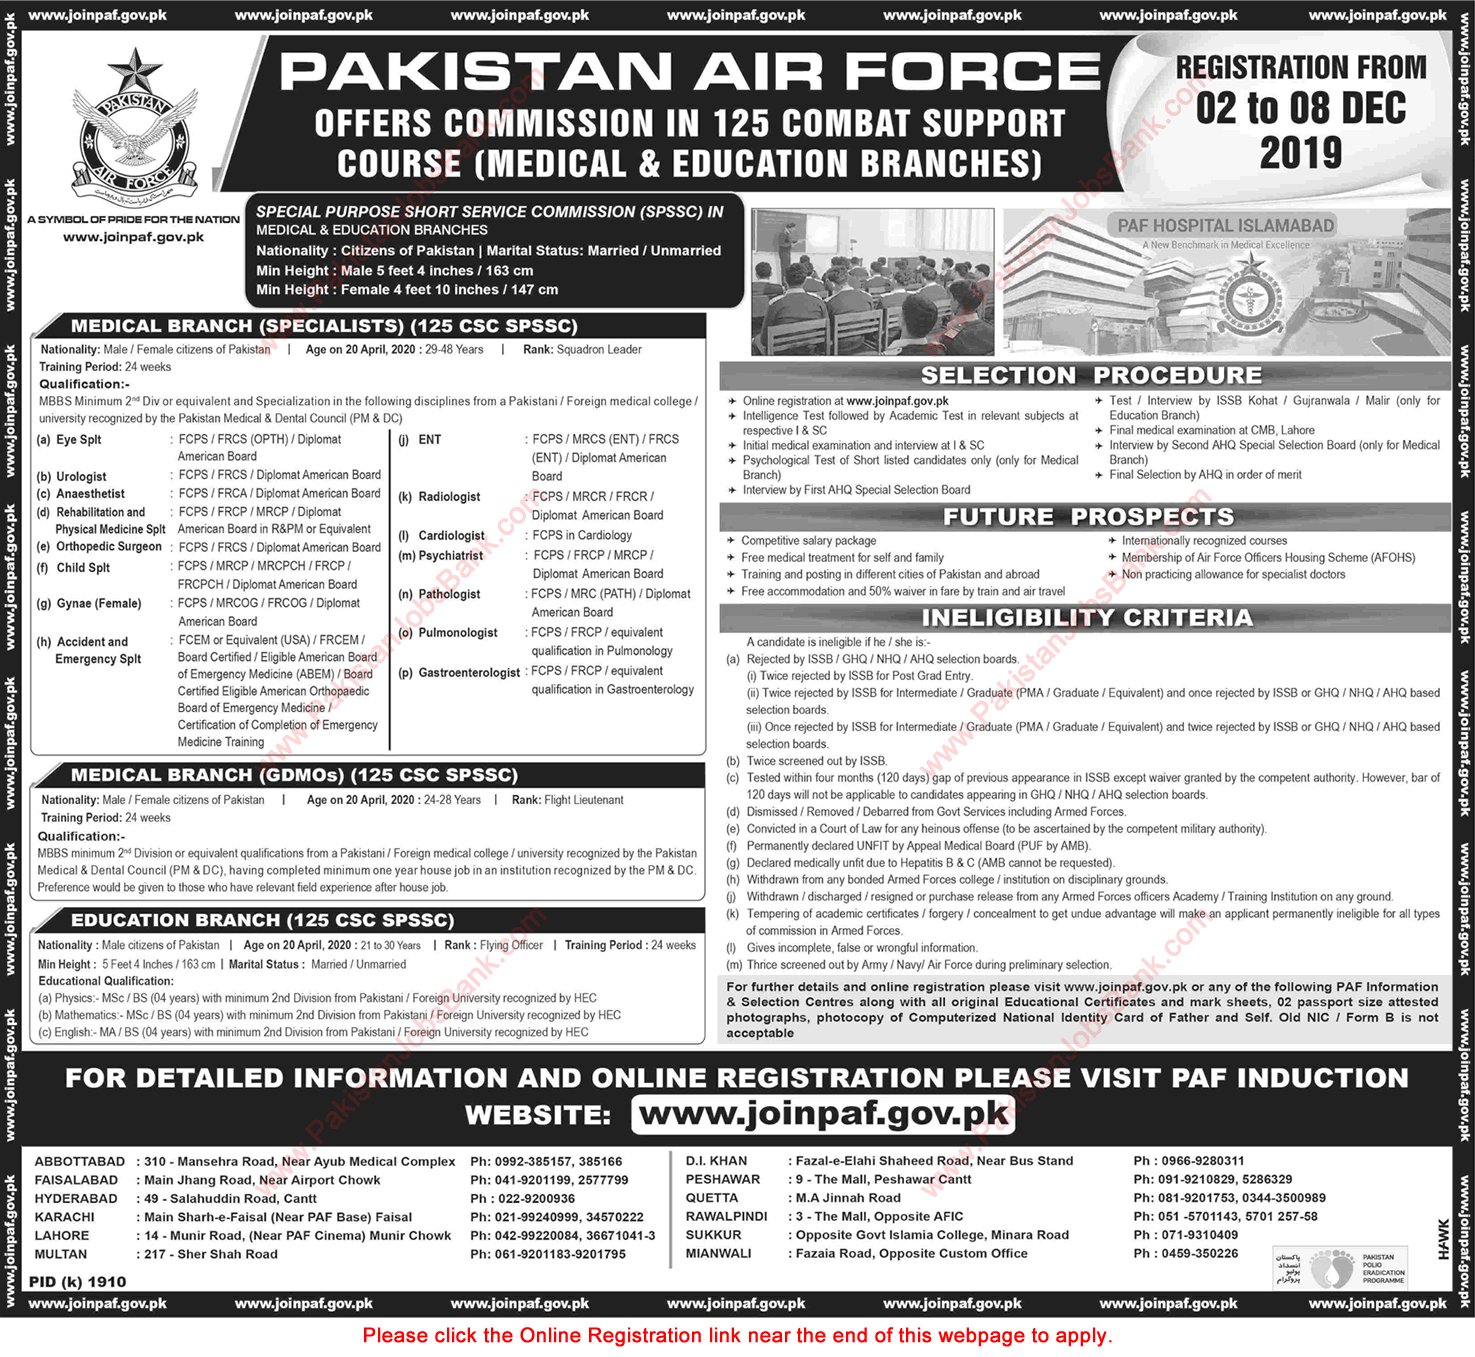 Join Pakistan Air Force December 2019 Online Registration SPSSC Commission in 125 Combat Support Course Latest